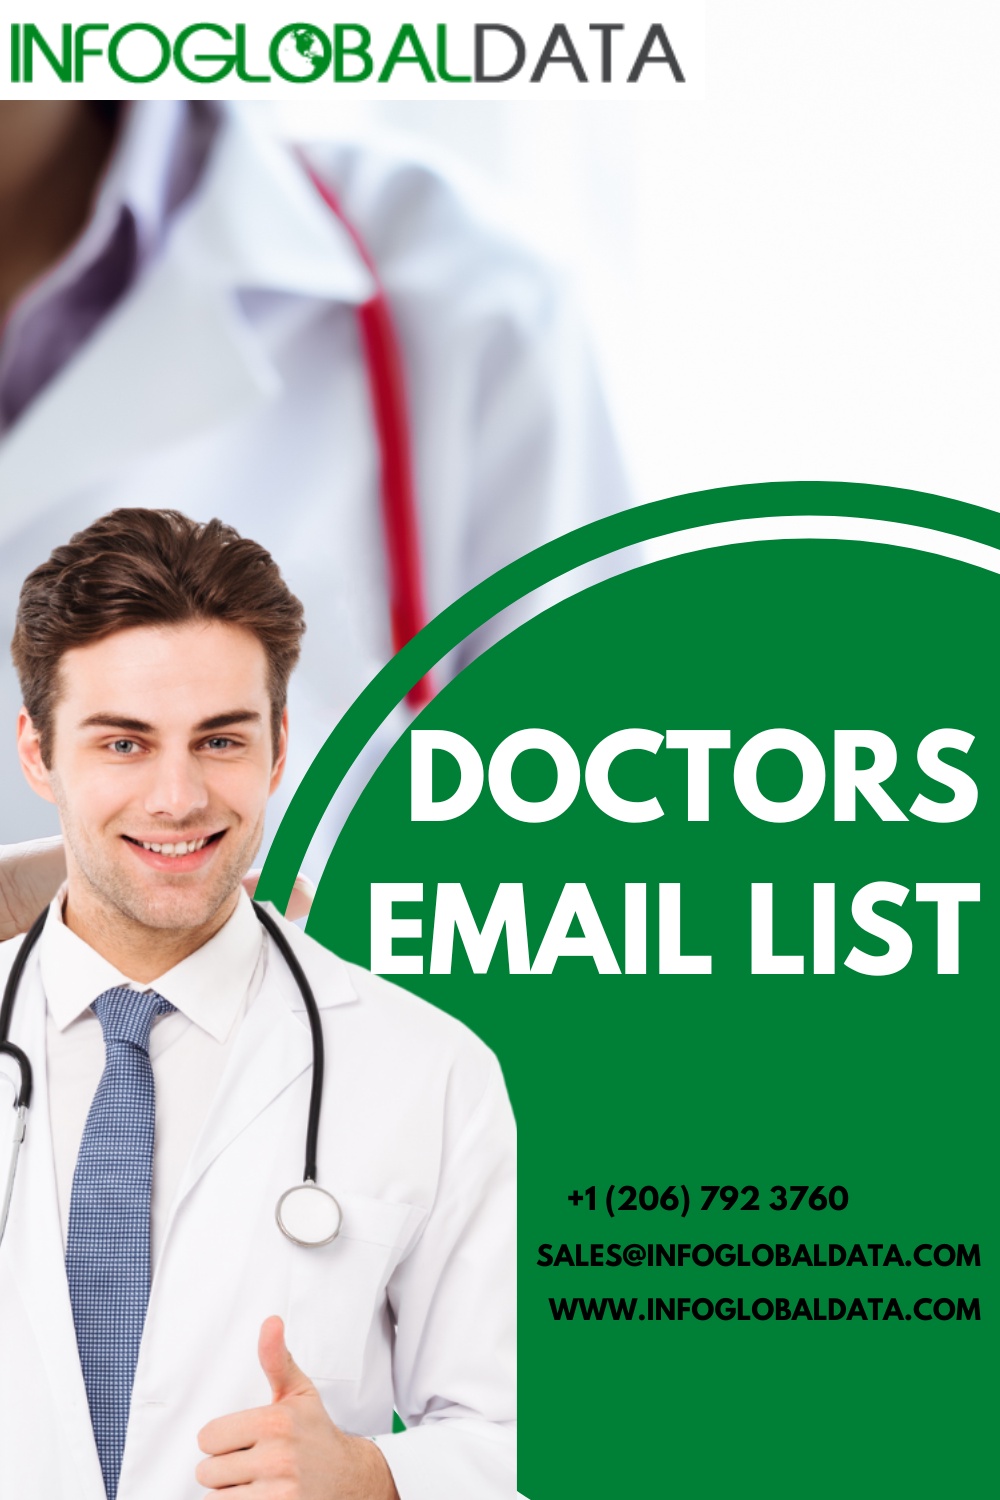 How does InfoGlobalData Doctors Email List help my business?